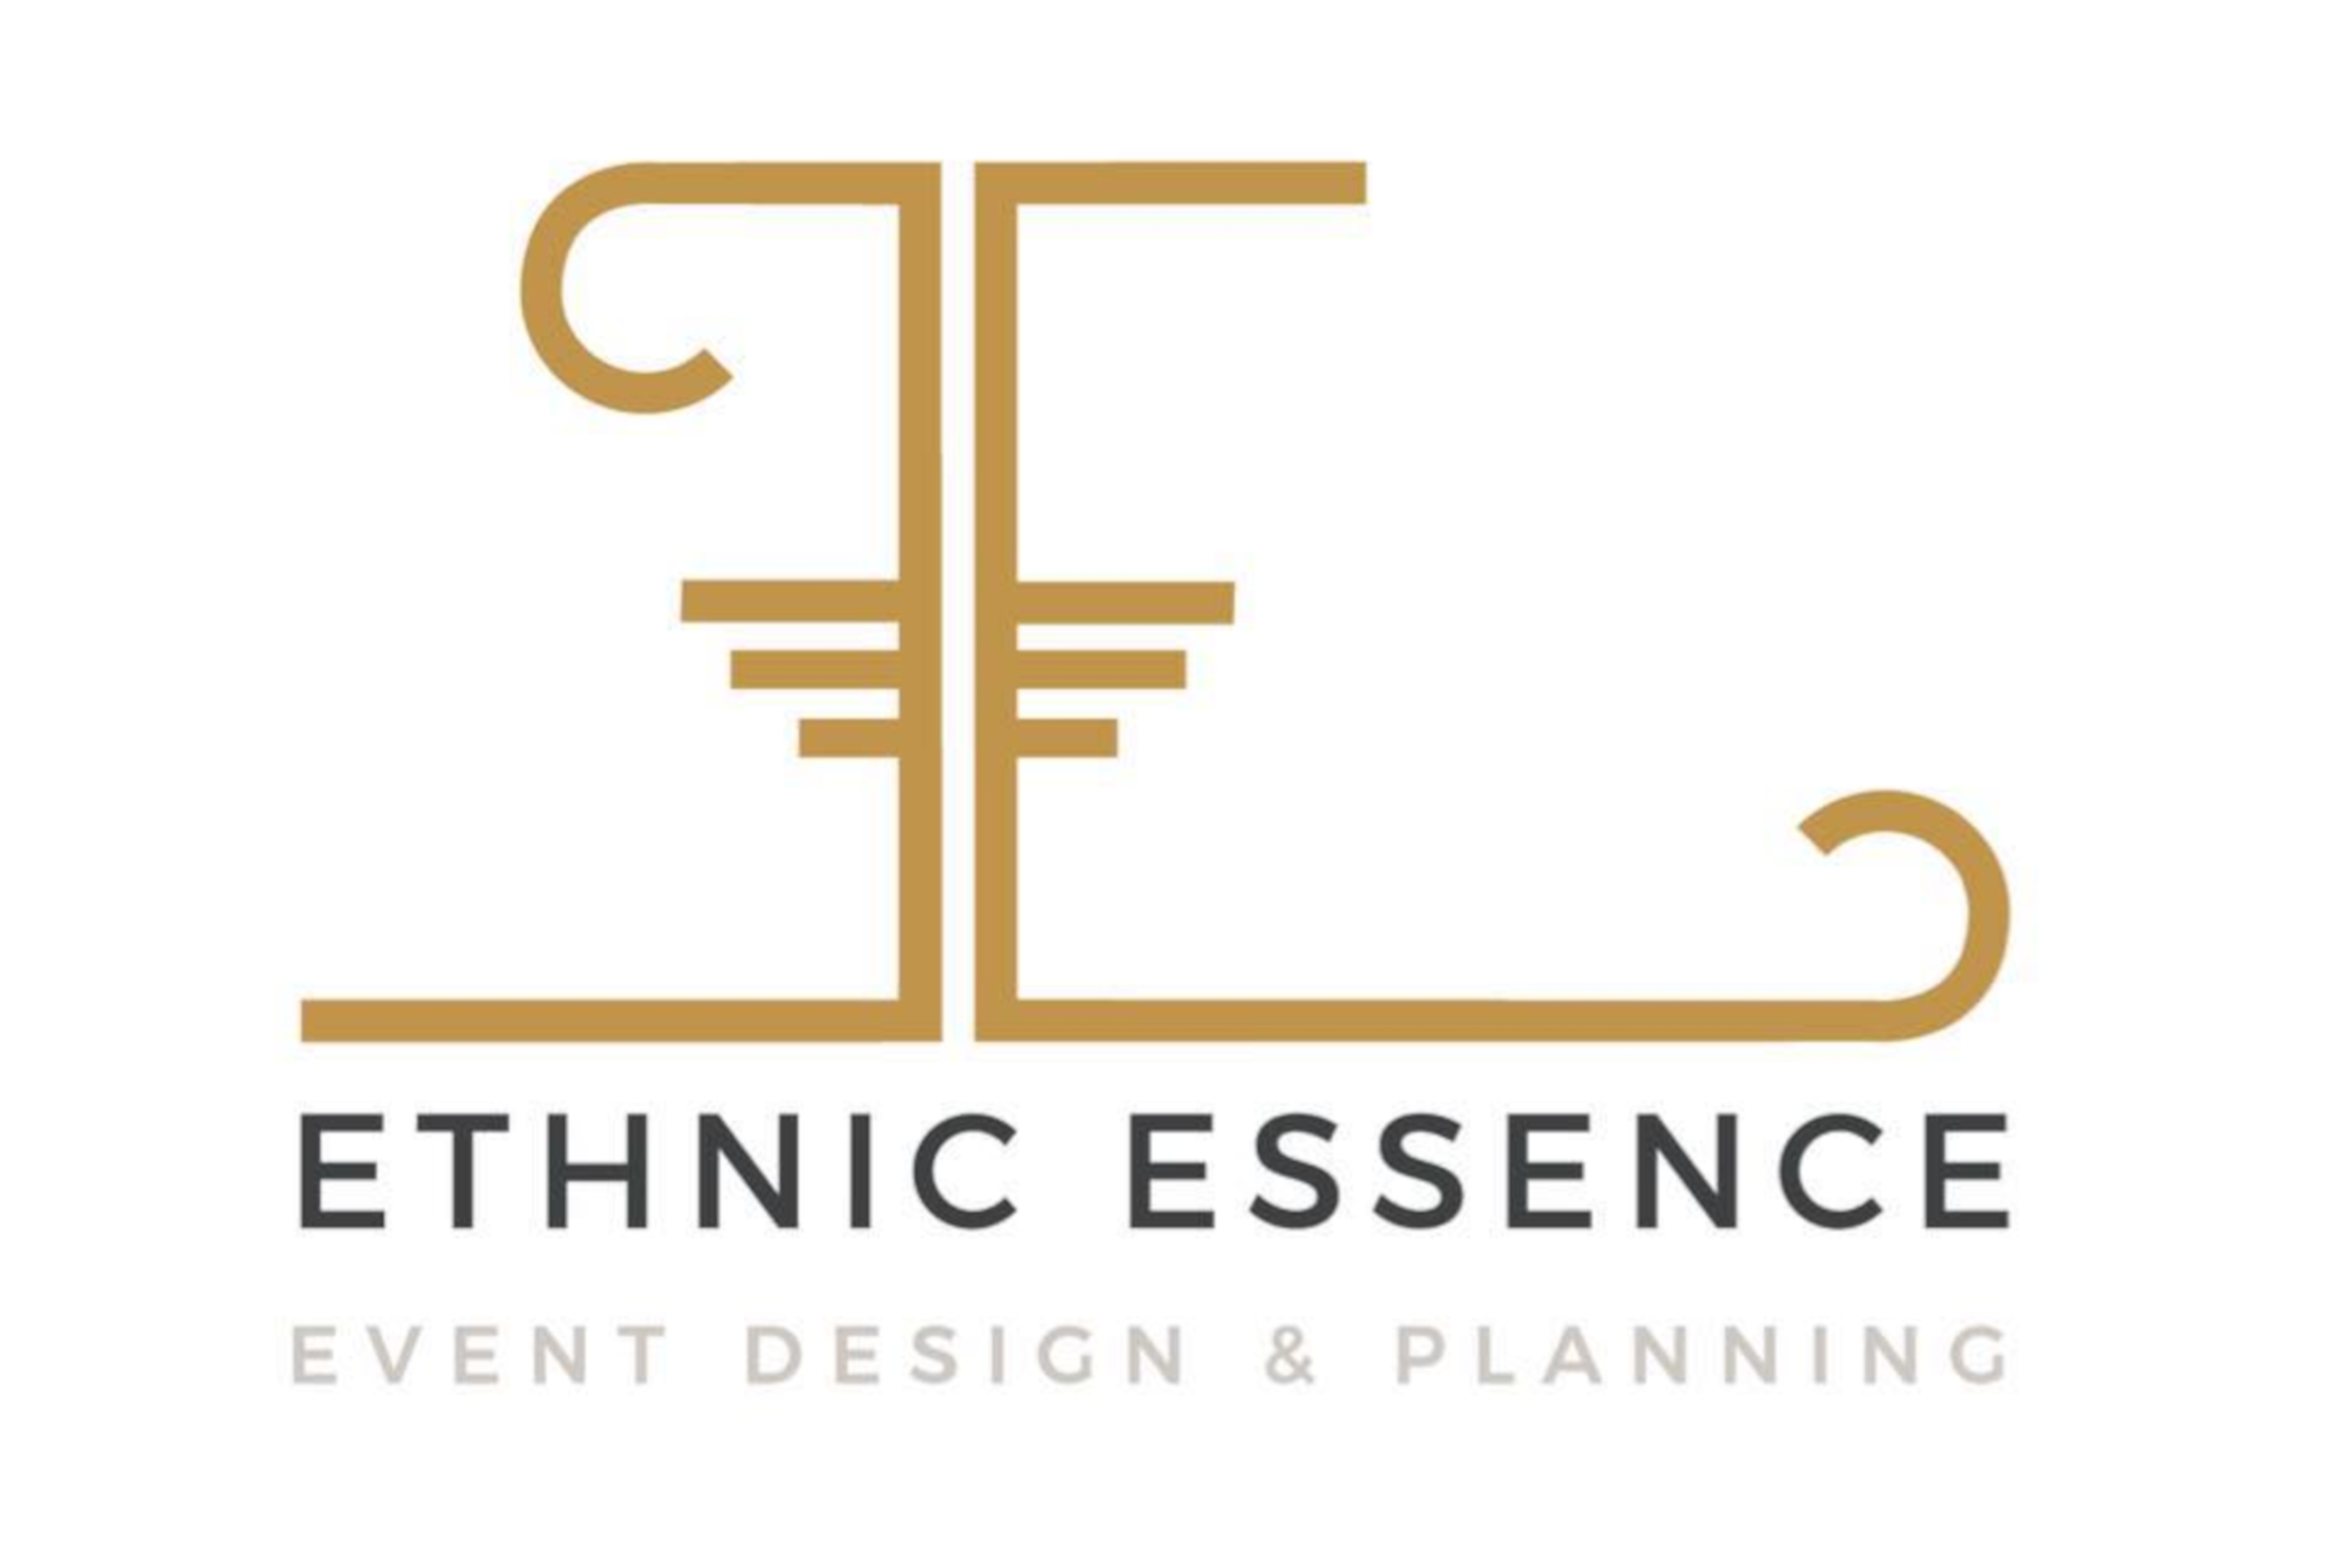 Ethnic Essence Event Design & Planning Logo with gold accent design